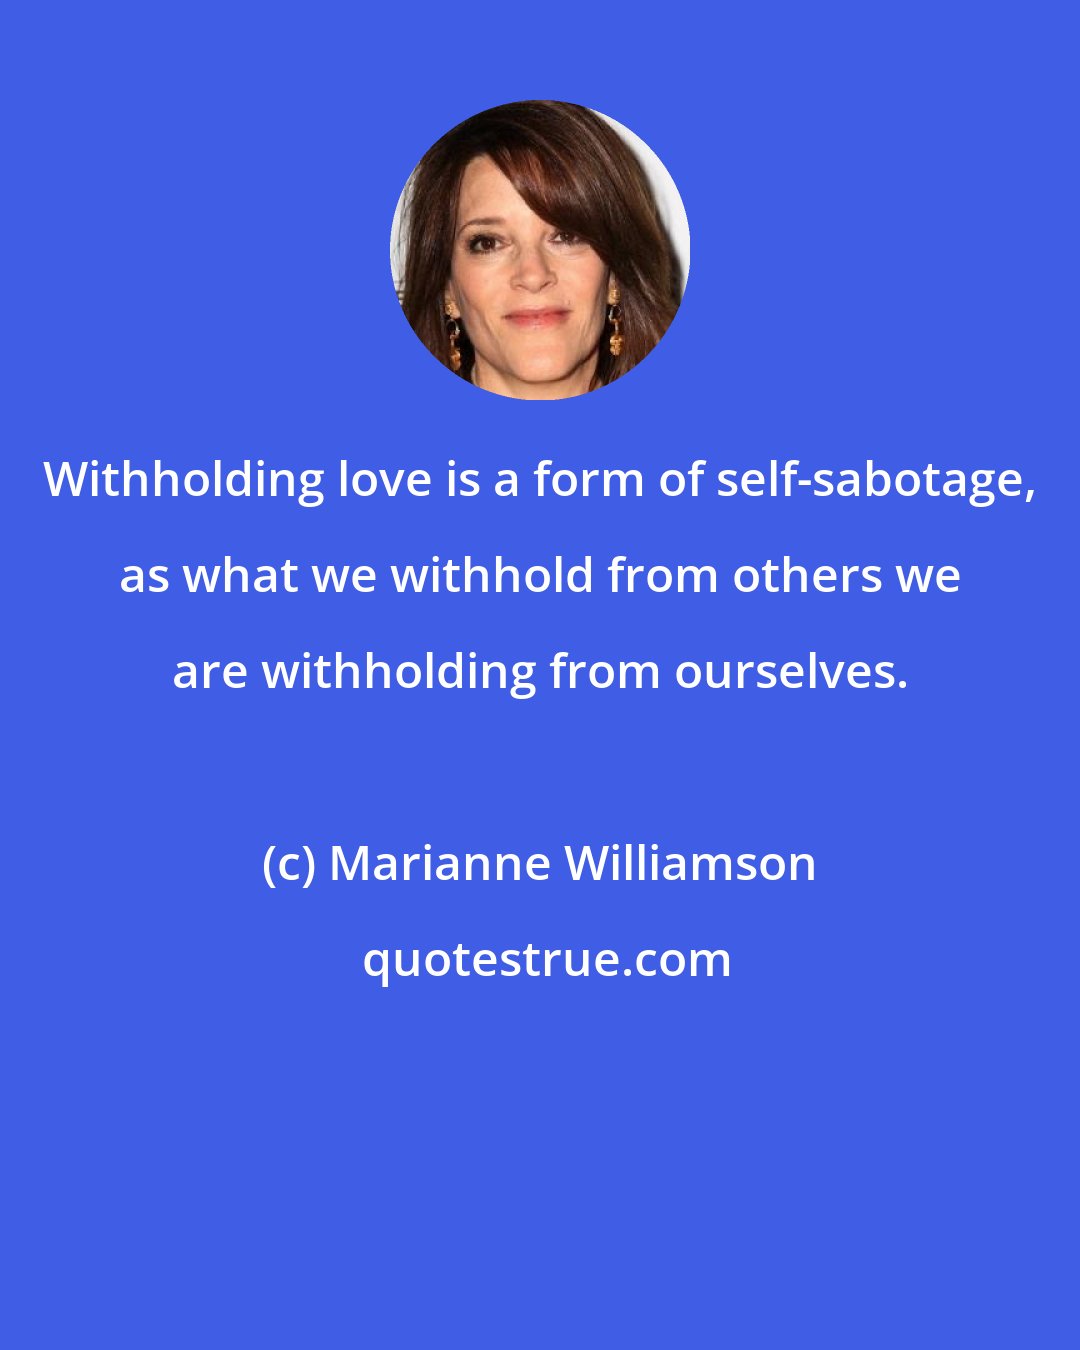 Marianne Williamson: Withholding love is a form of self-sabotage, as what we withhold from others we are withholding from ourselves.